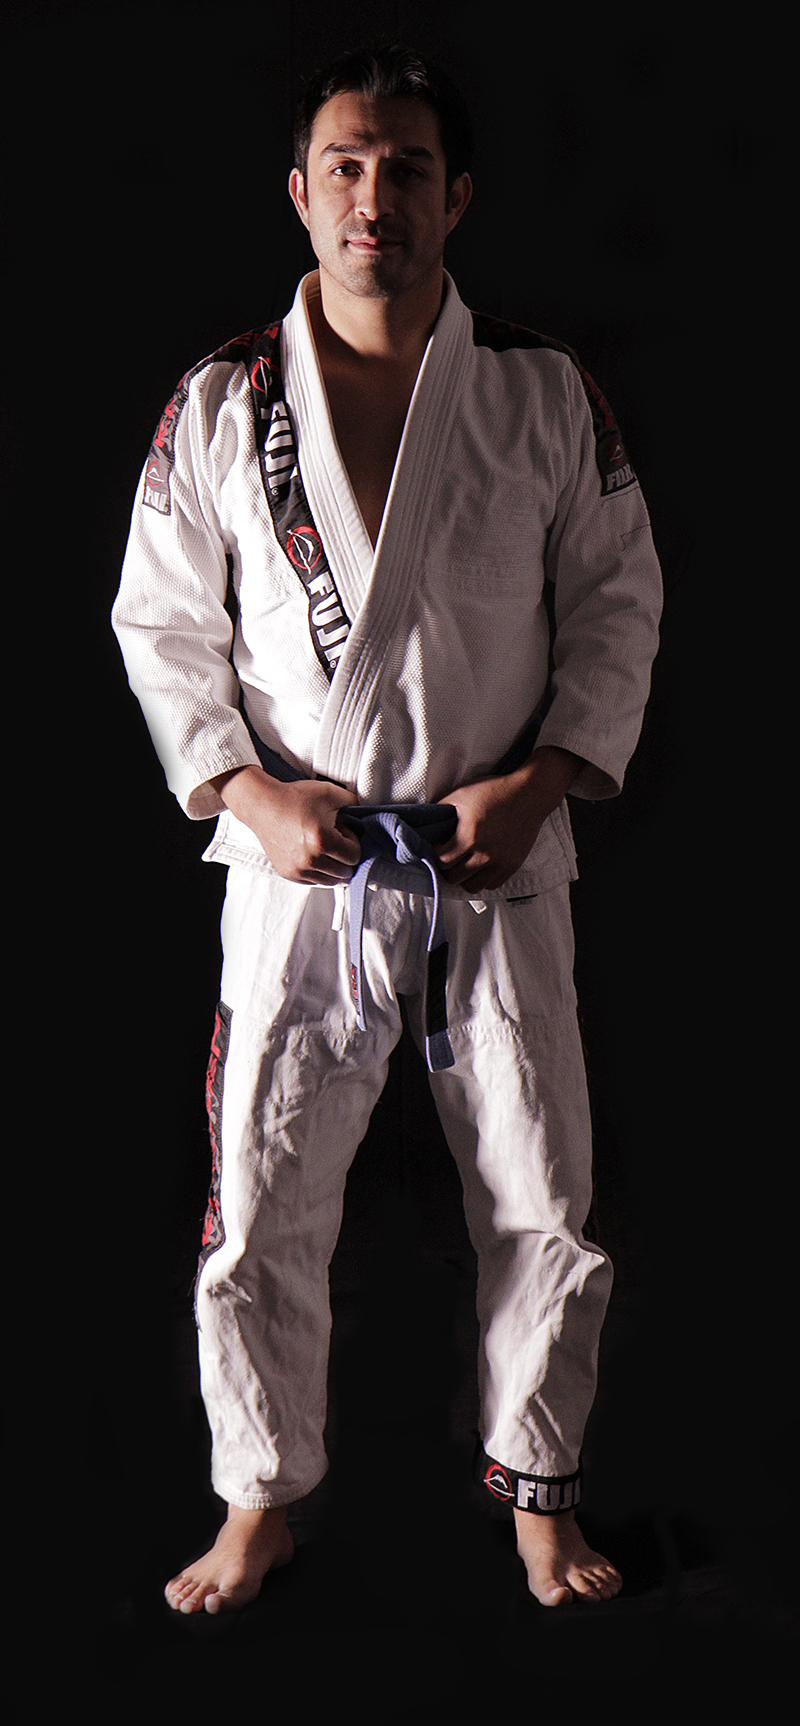 a man in white karate garb standing with his hands on his belt